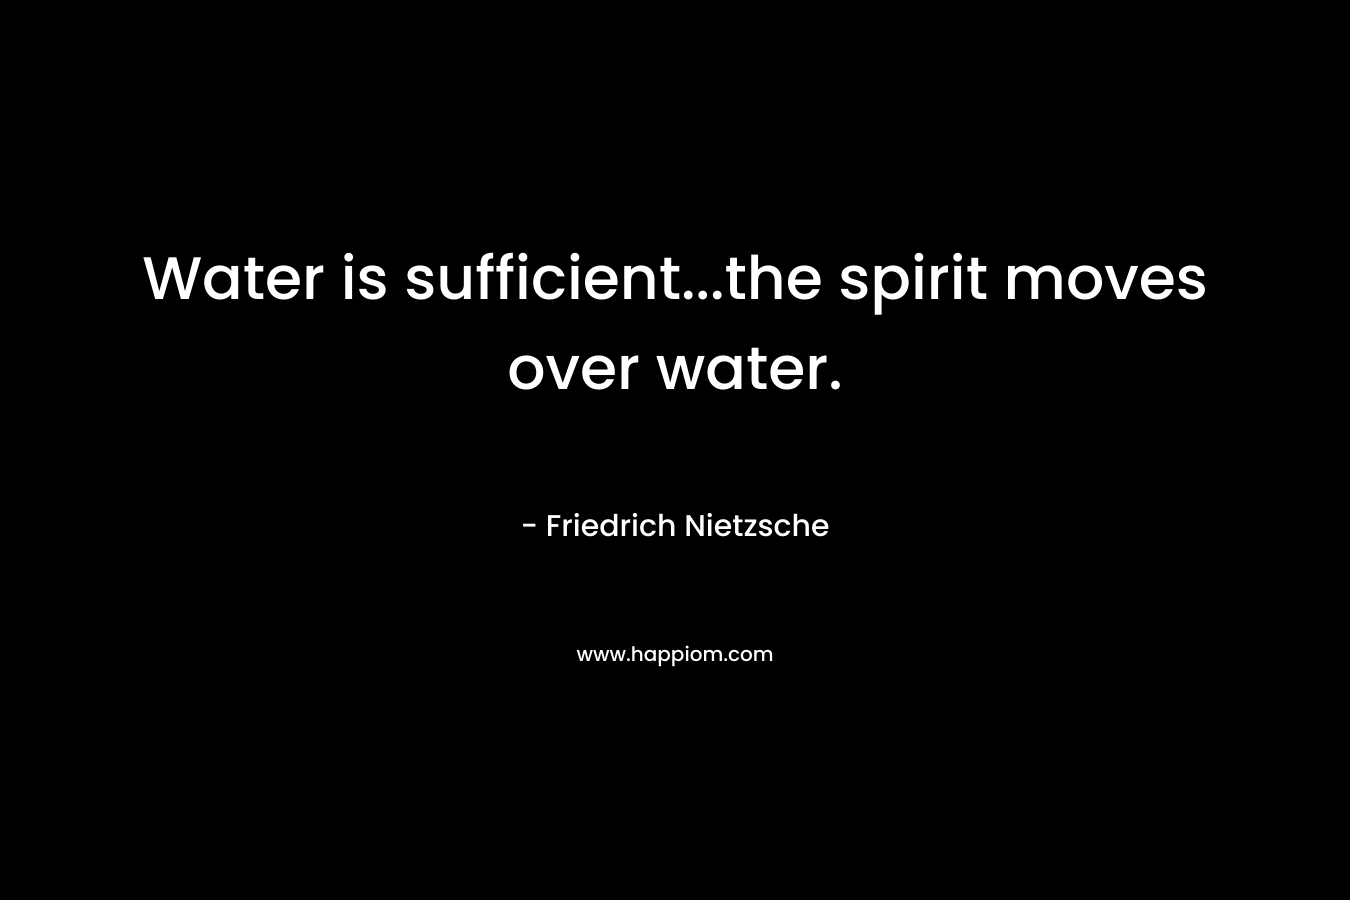 Water is sufficient...the spirit moves over water.